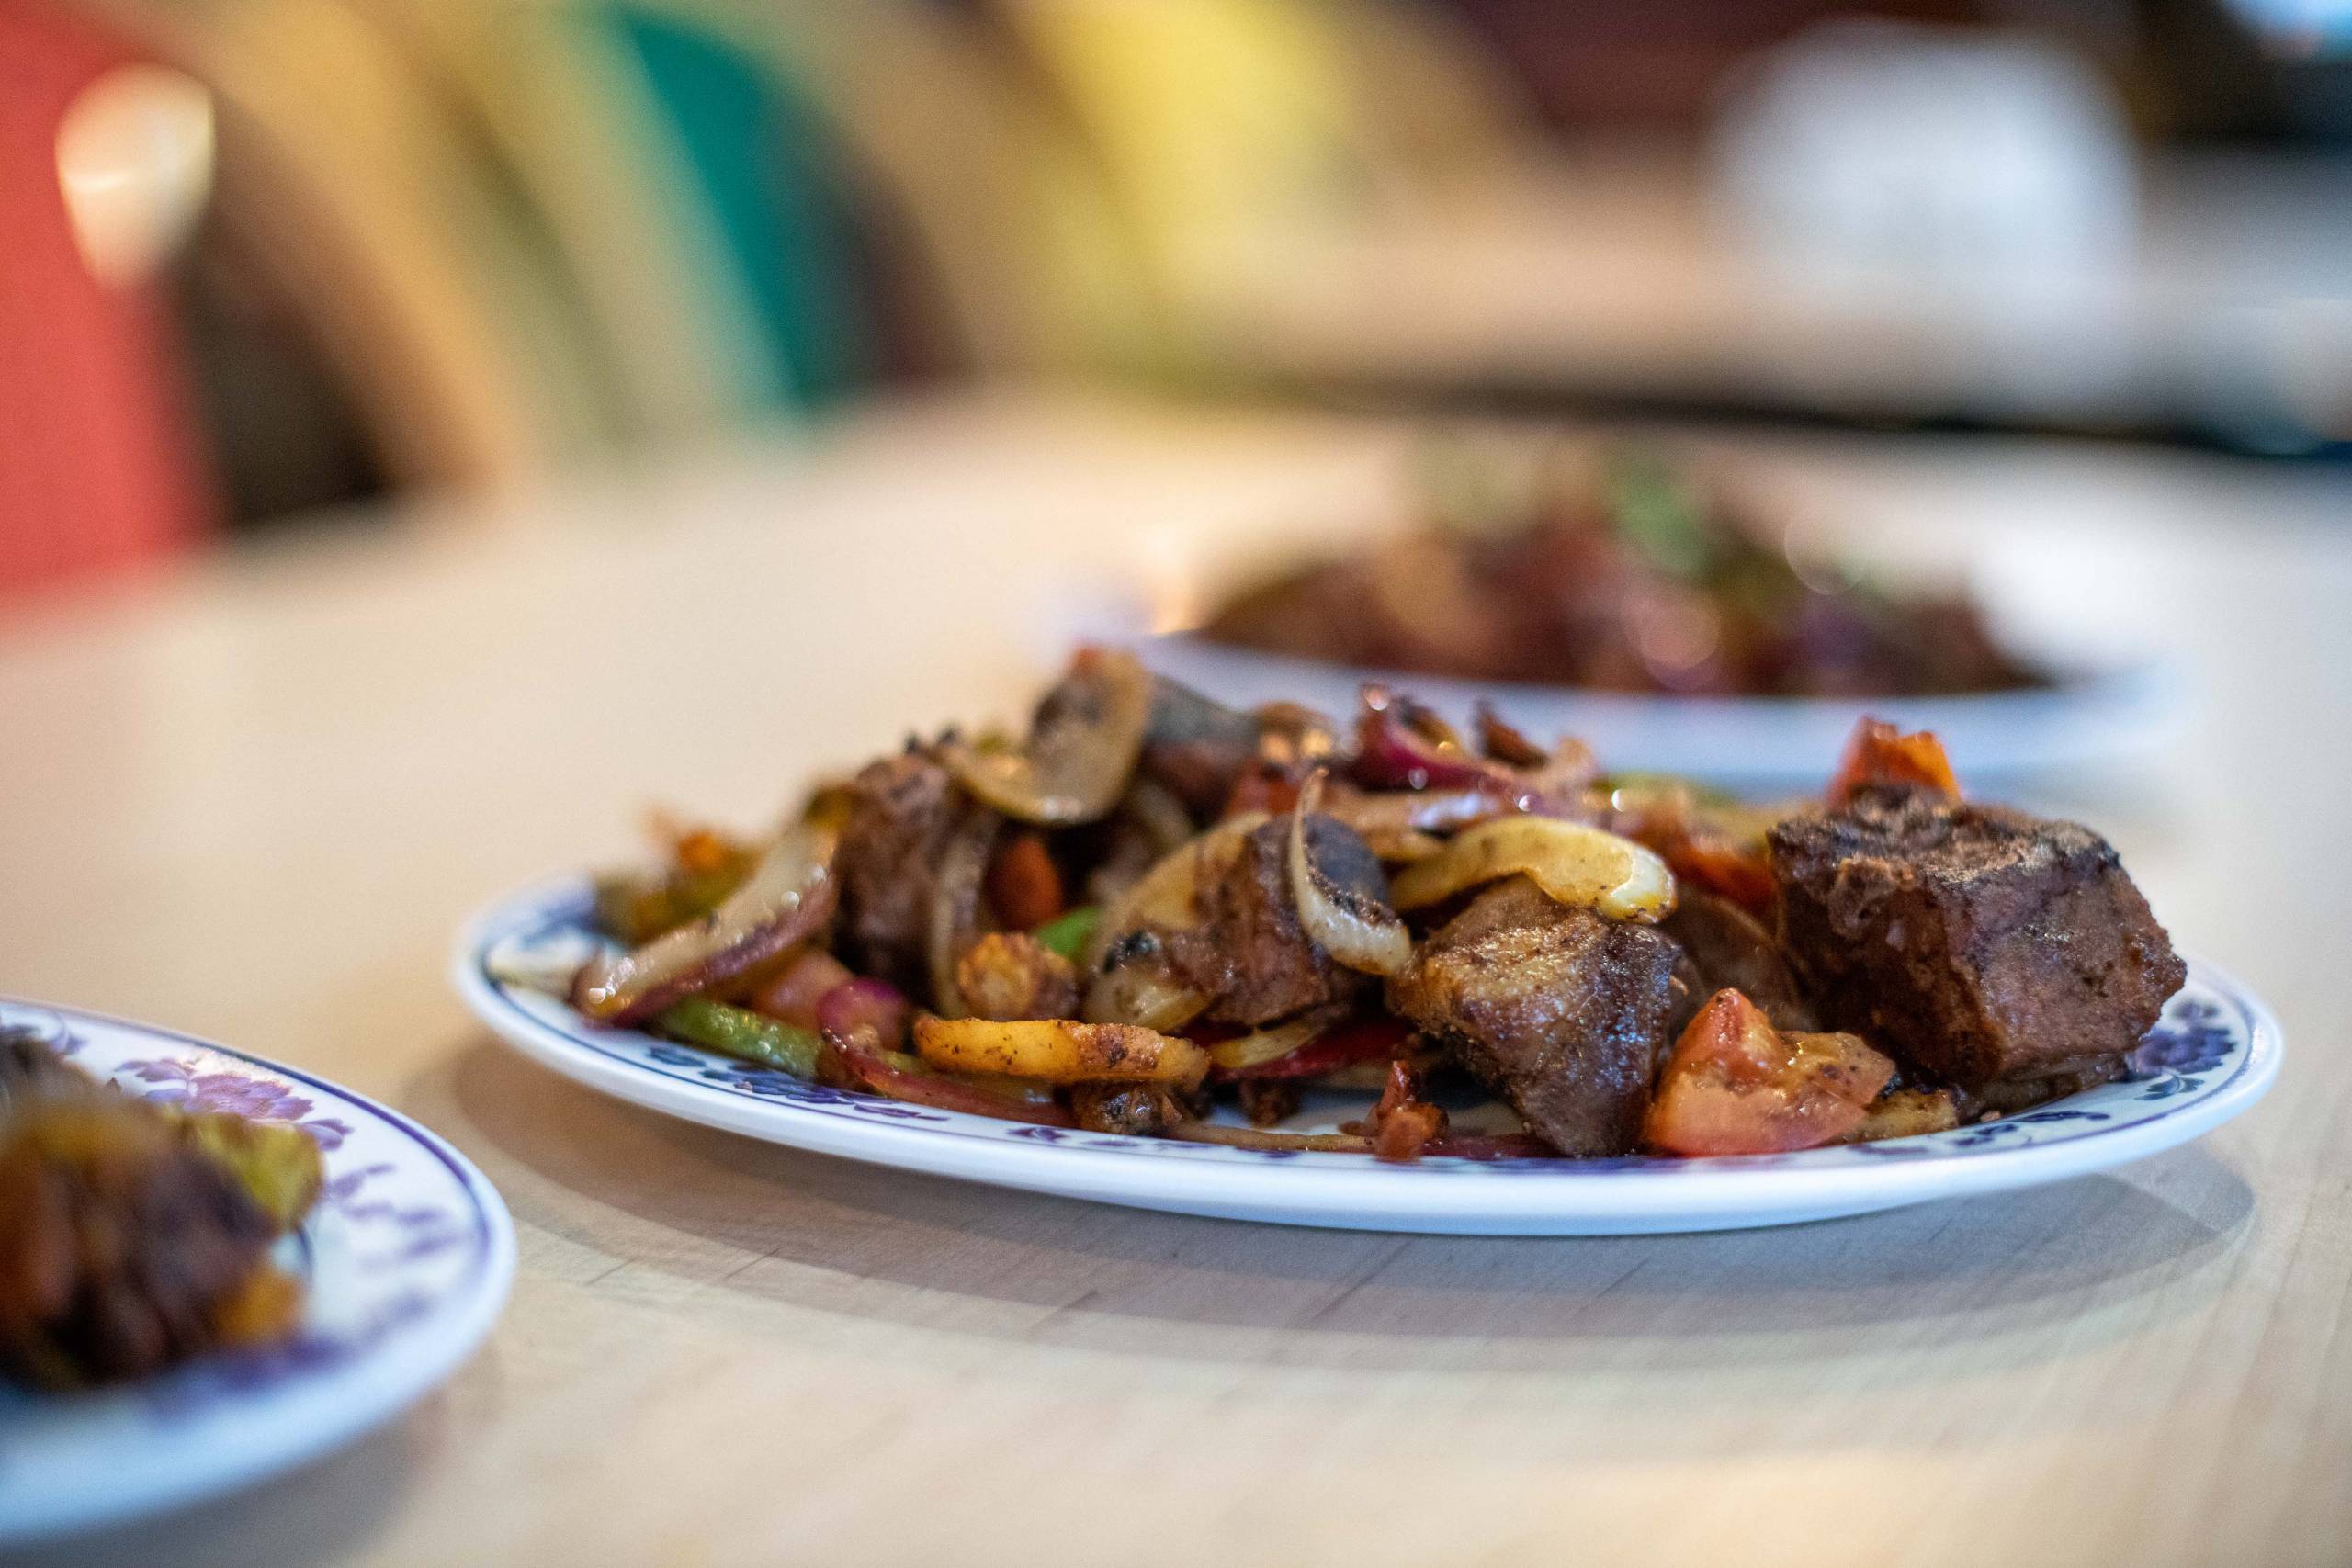 A plate of Somali-style goat suqaar—a kind of stir-fry—on a table.